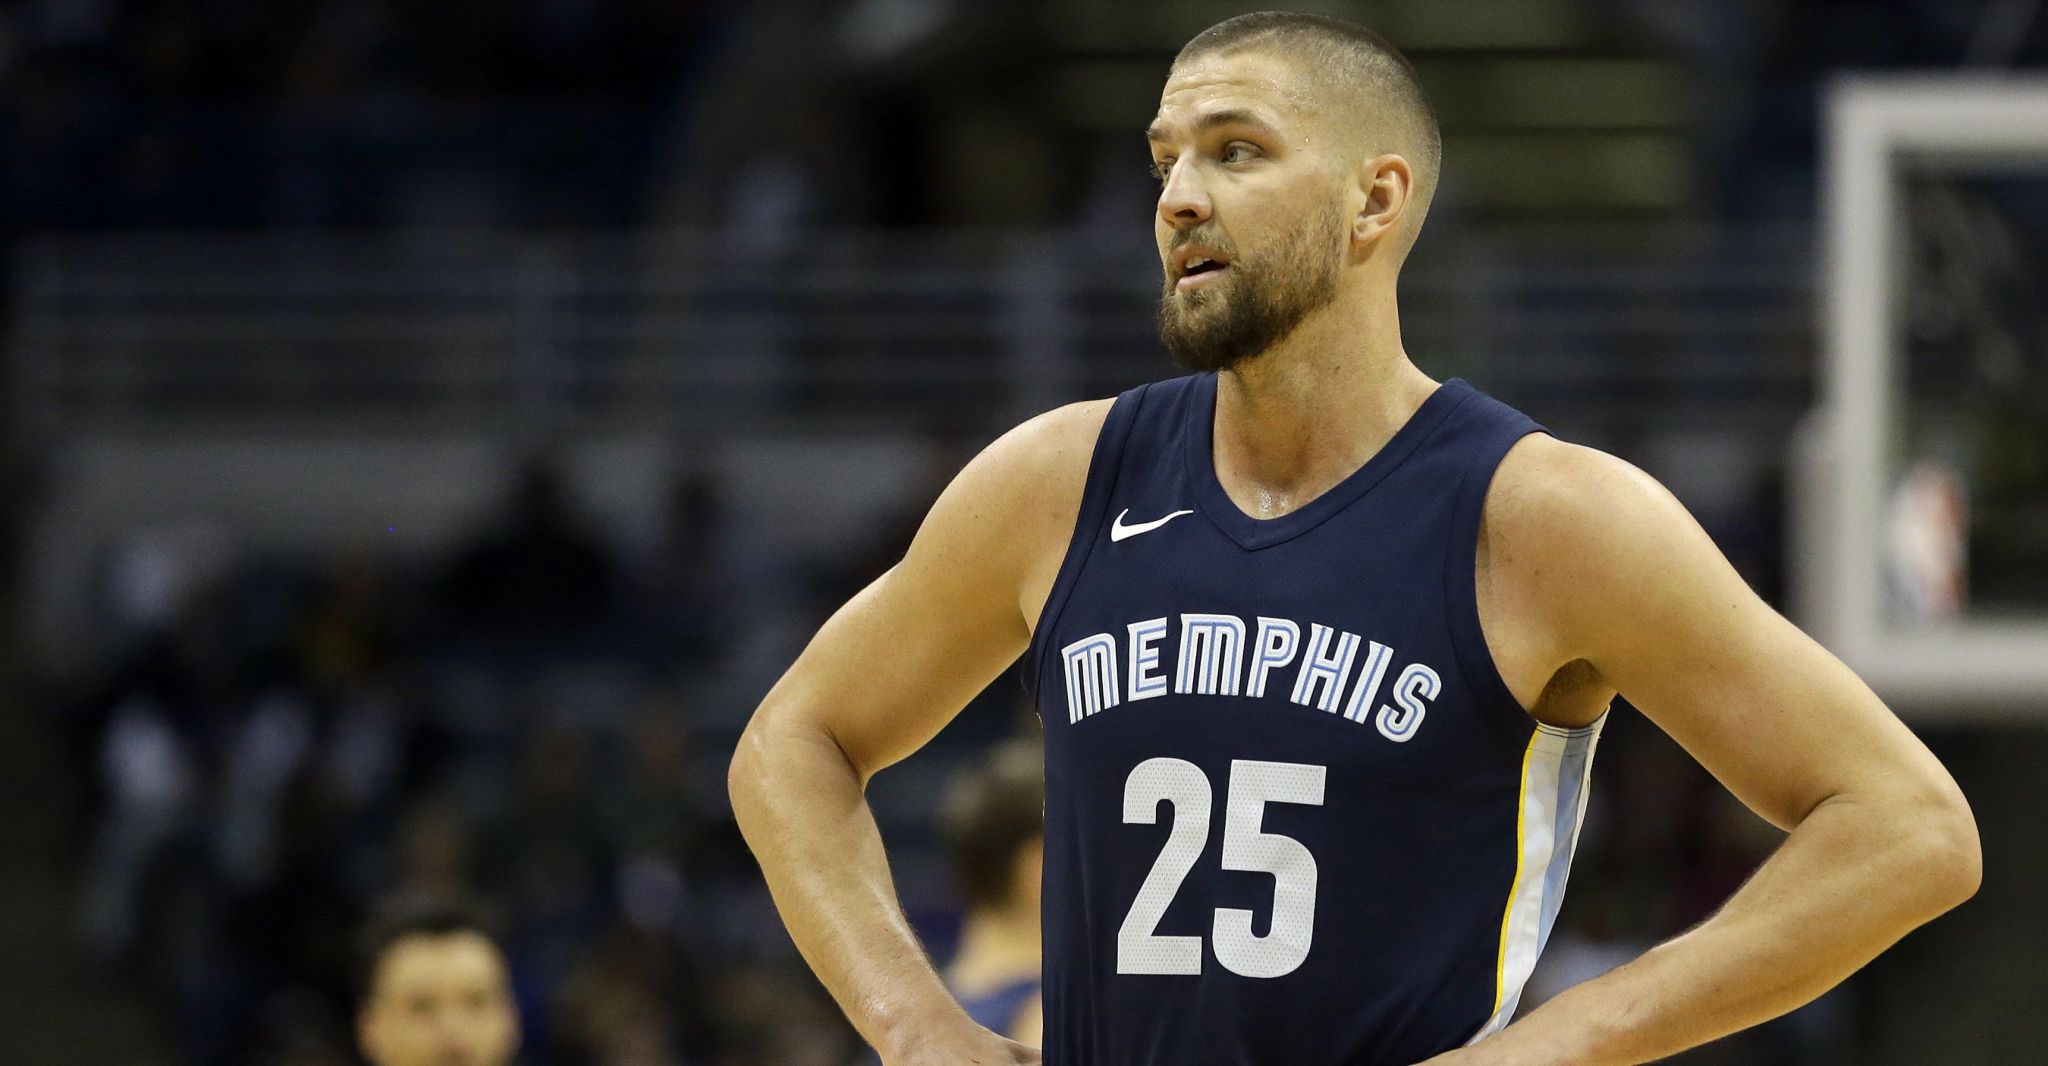 Grizzlies' Chandler Parsons starts against Rockets - Houston Chronicle